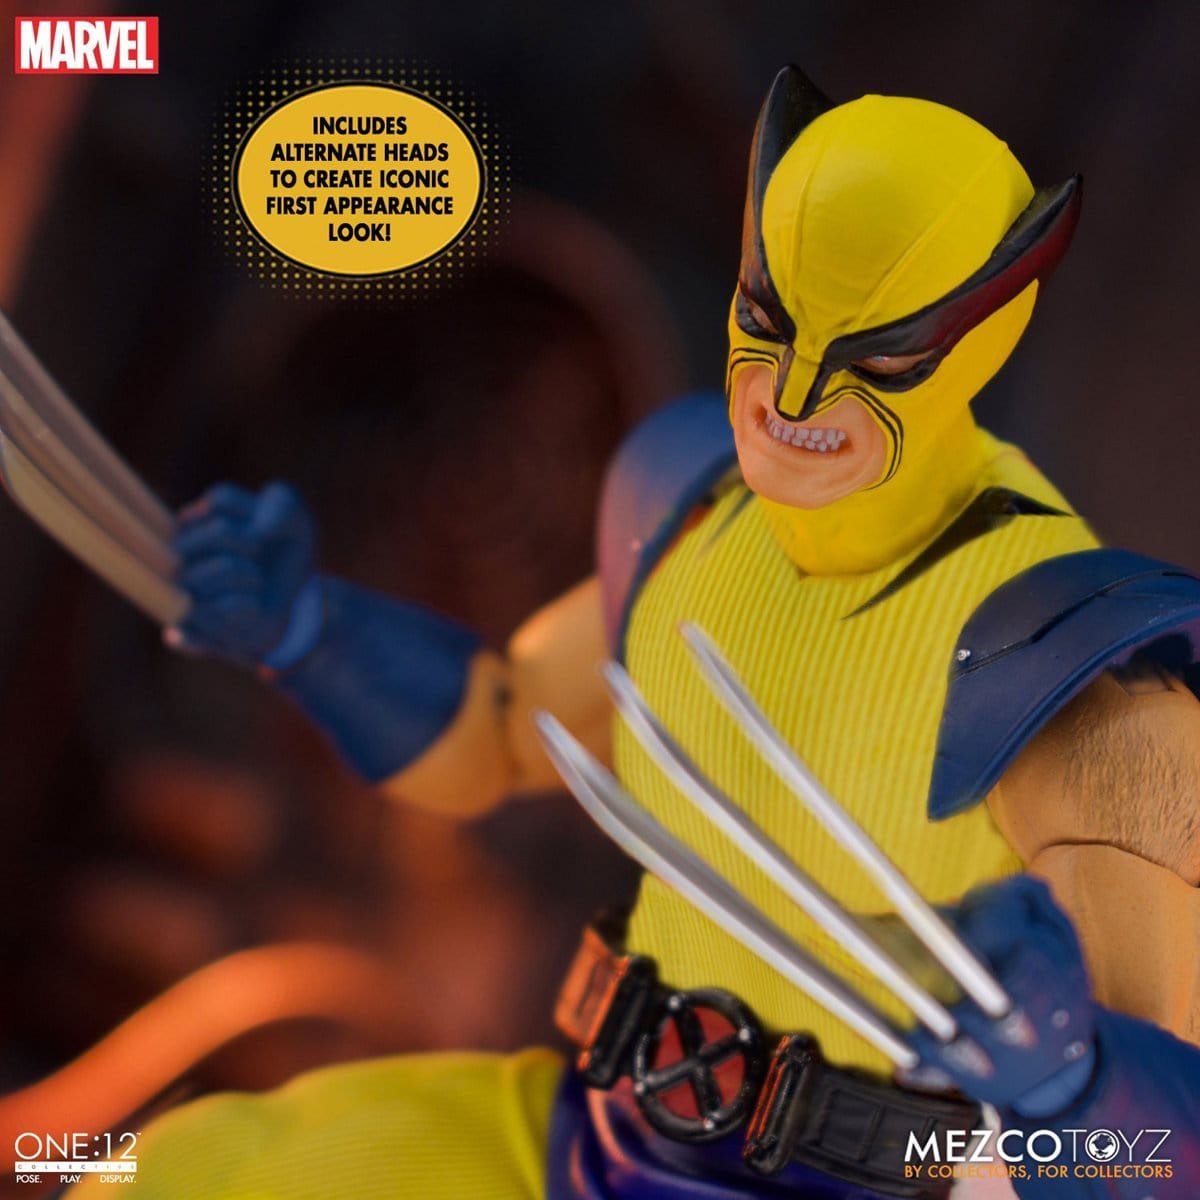 X-Men Wolverine One:12 Collective Deluxe Box Action Figure Pop-O-Loco